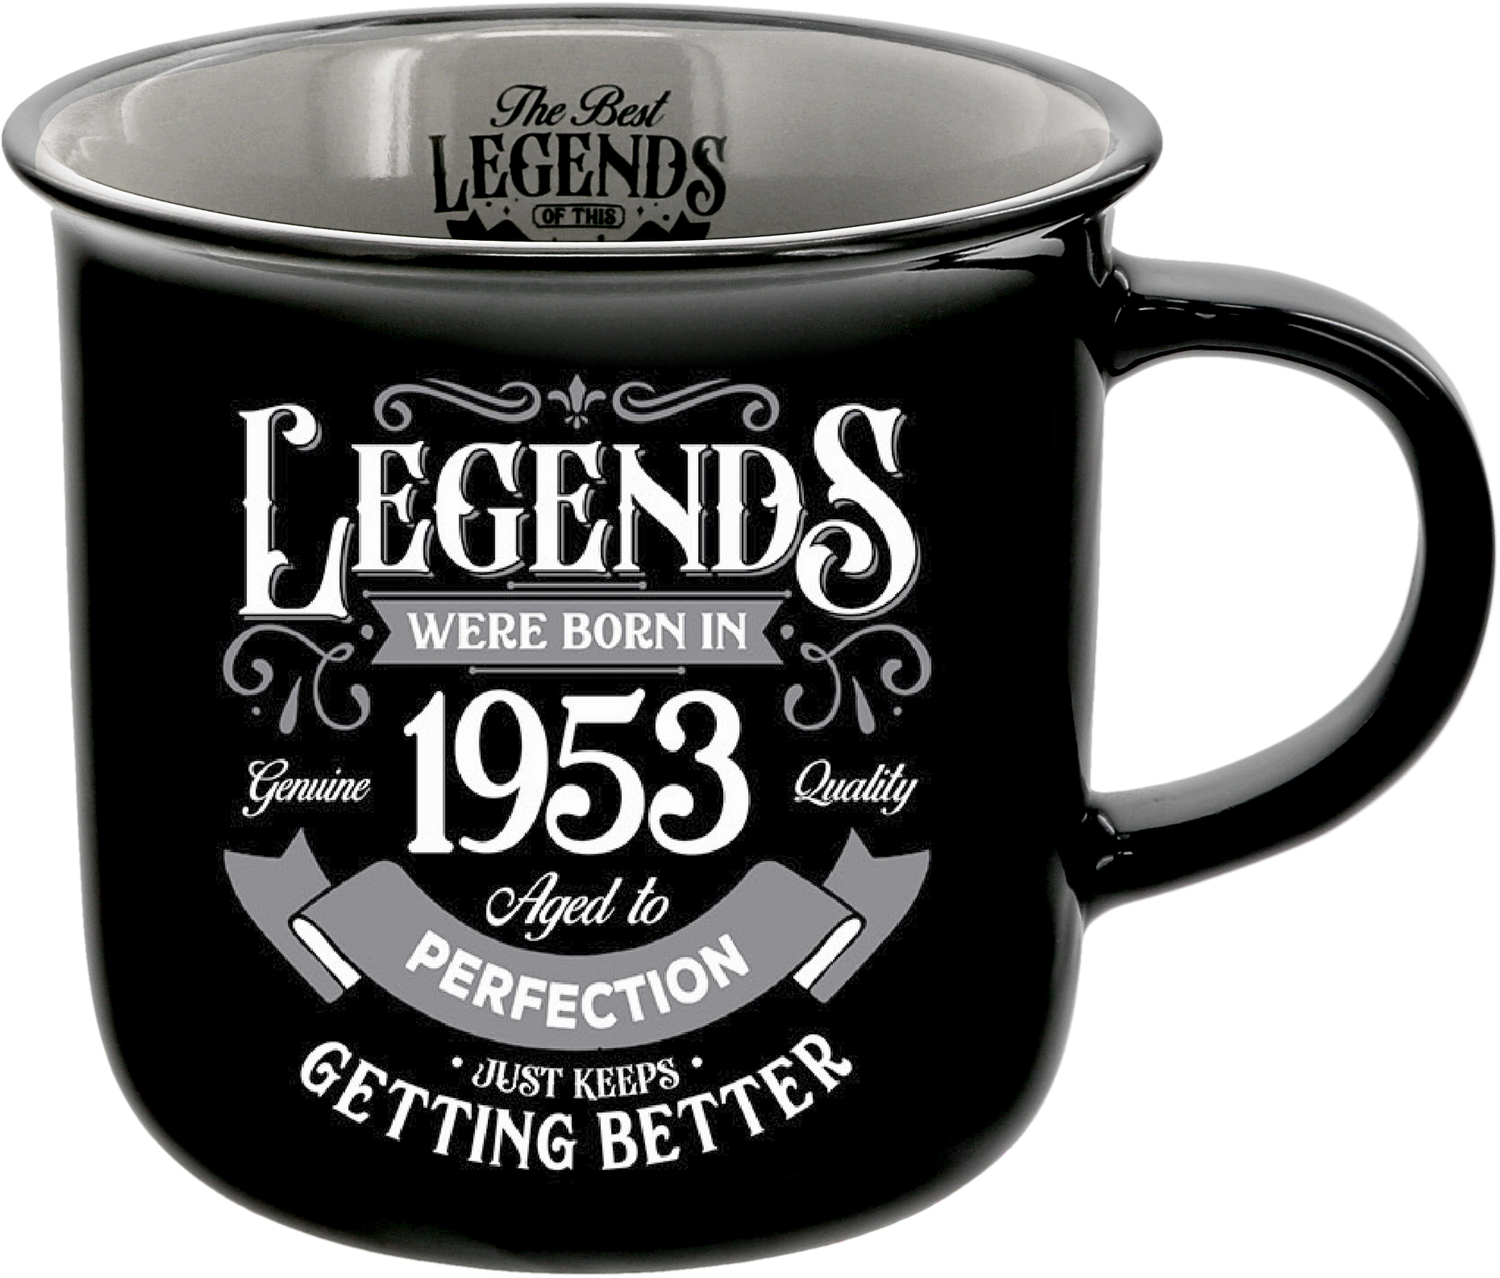 1953 by Legends of this World - 1953 - 13 oz Mug